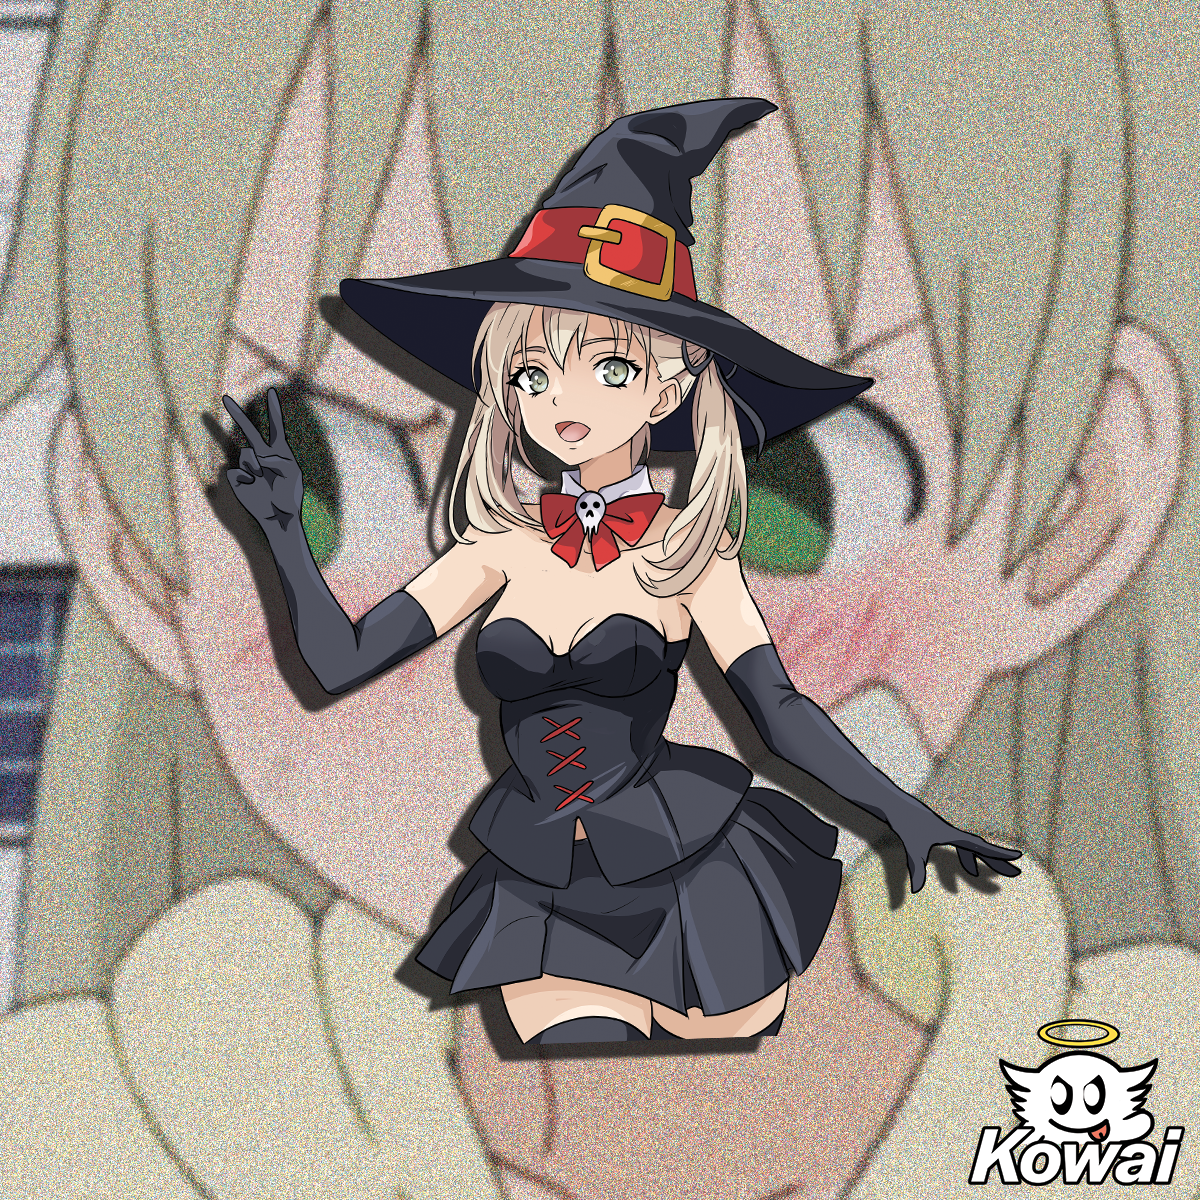 SE - Best Girl Witch Small Booba